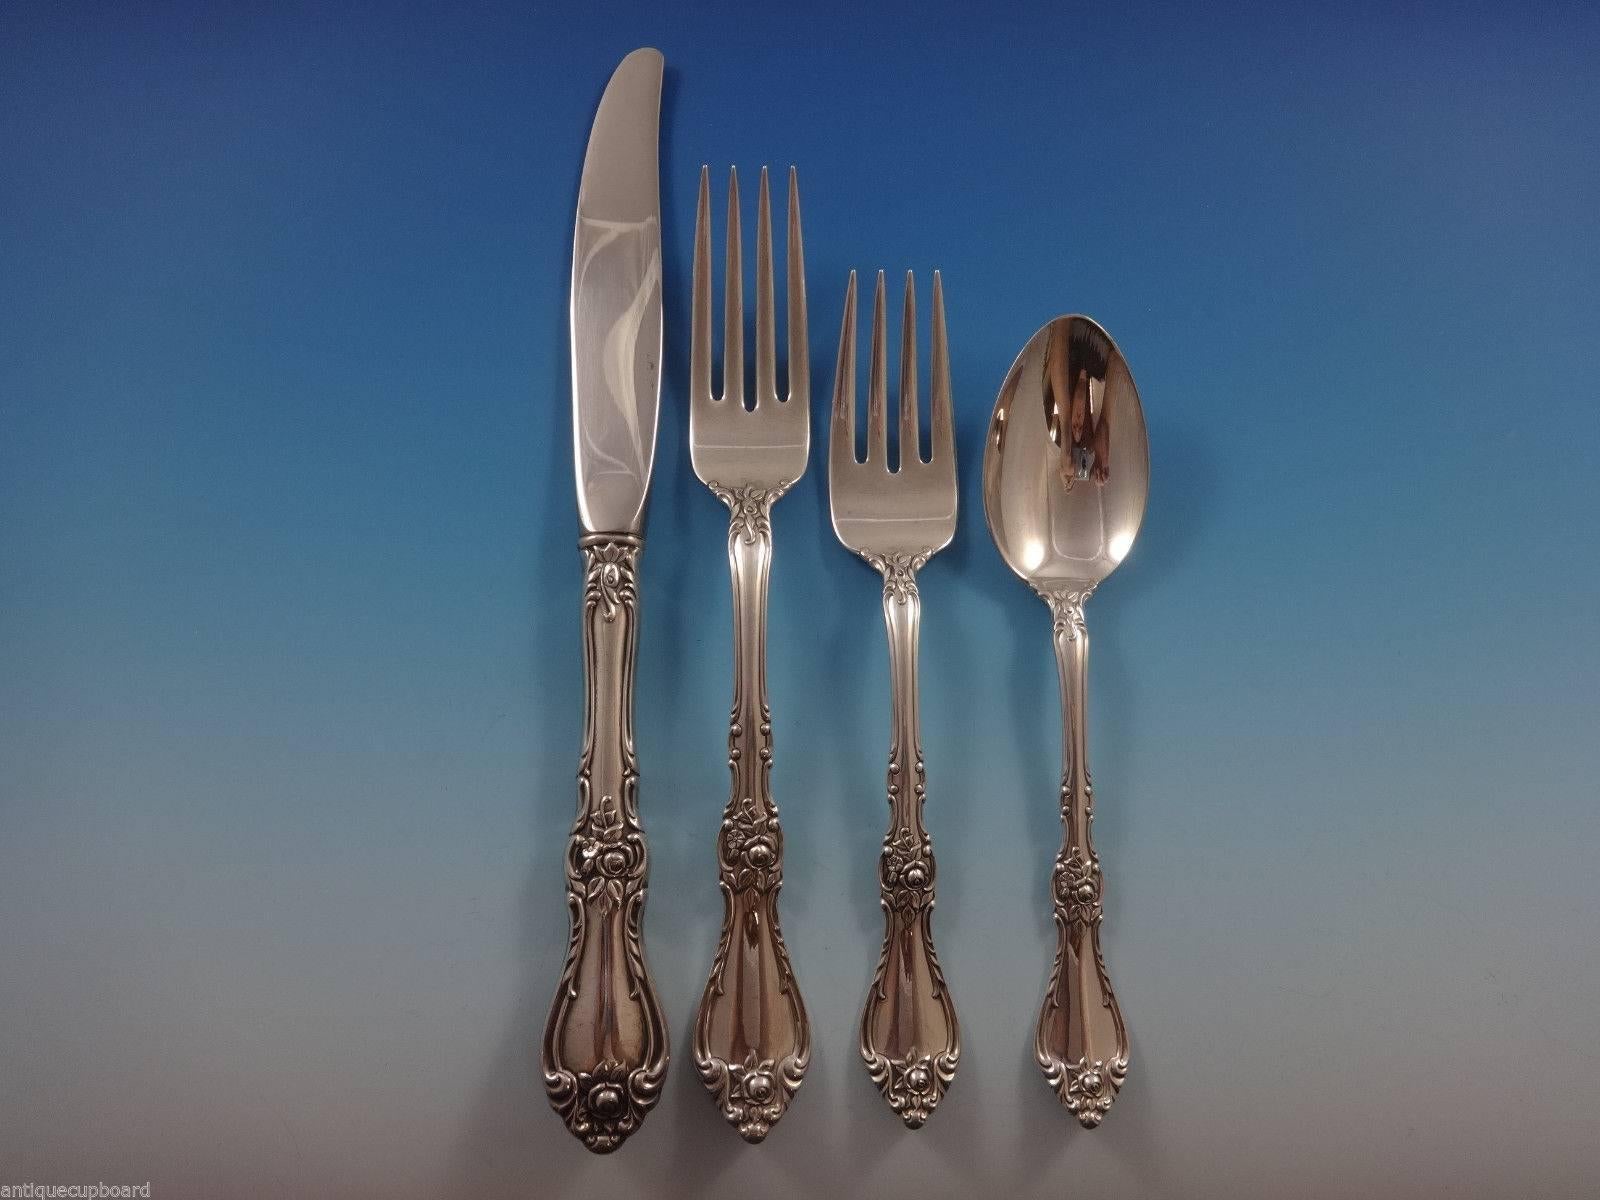 Beautiful Royal Rose by Wallace sterling silver flatware set of 50 pieces. This set includes:

Stunning set12 knives, 9